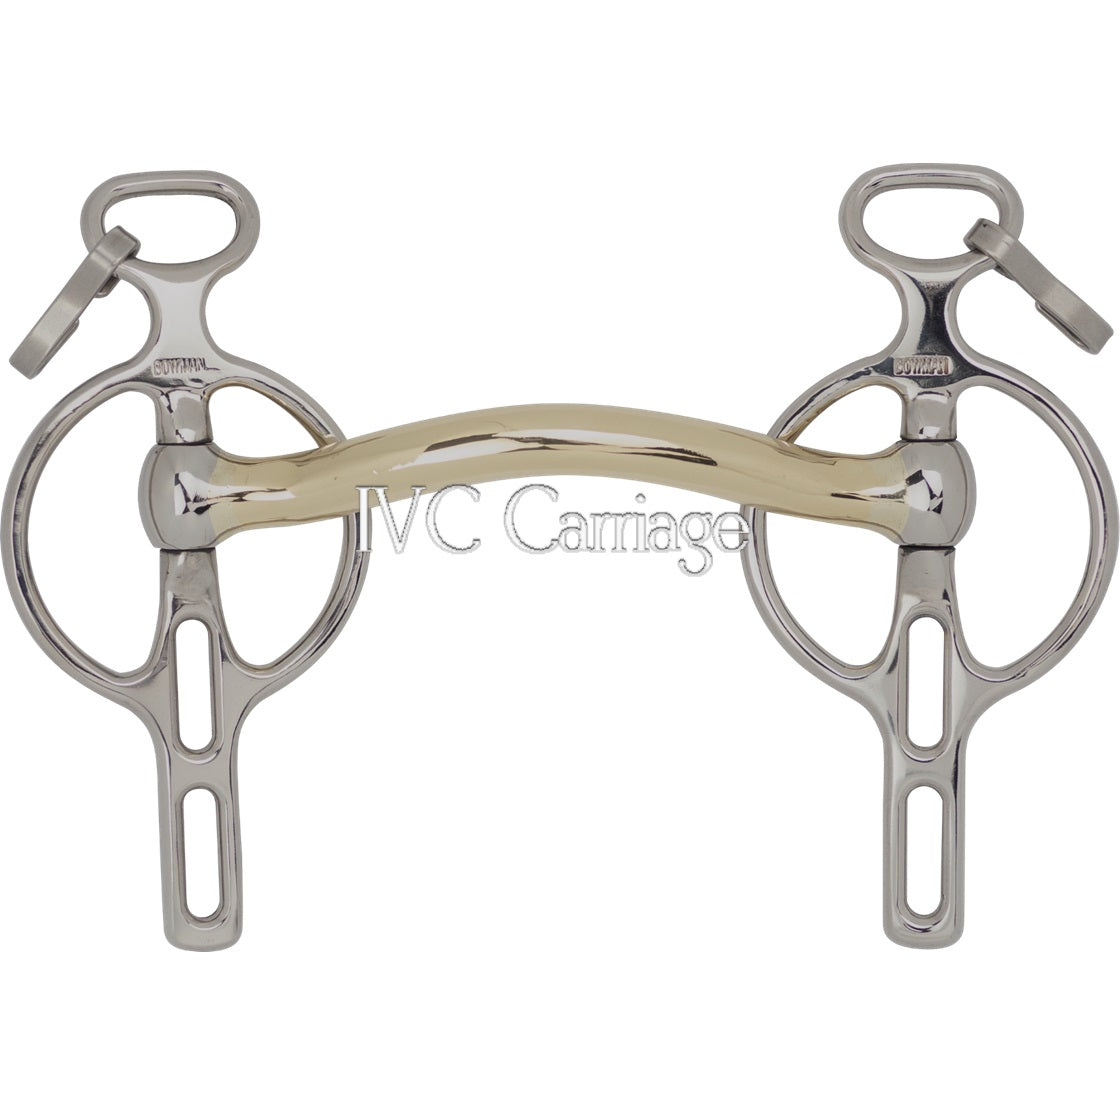 Bowman 45 Degree Victory Liverpool Horse Bit | IVC Carriage